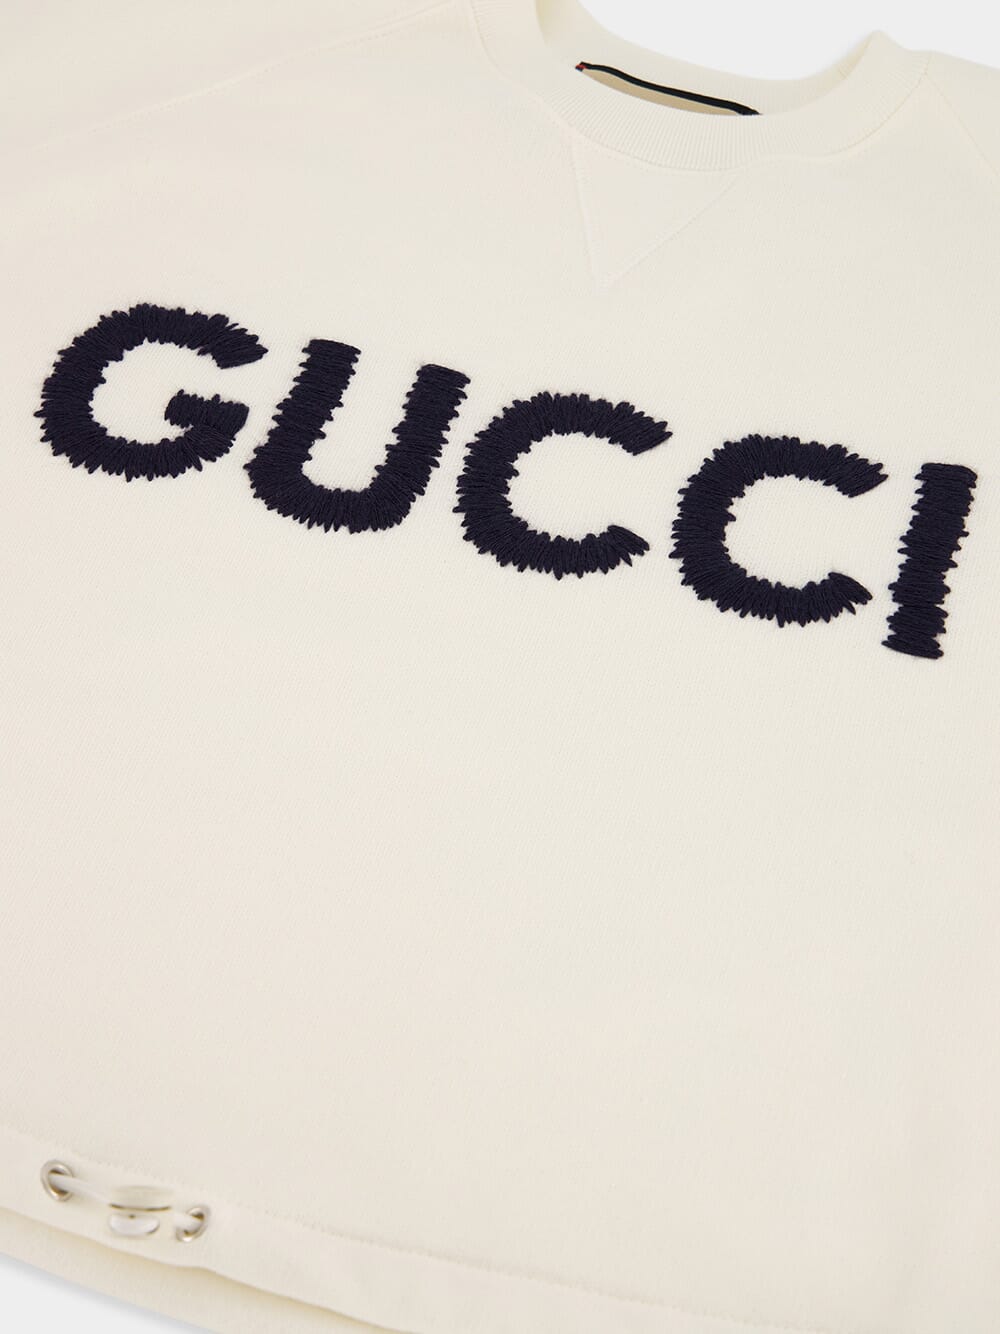 GucciKnitted Effect Gucci Embroidery Sweatshirt at Fashion Clinic